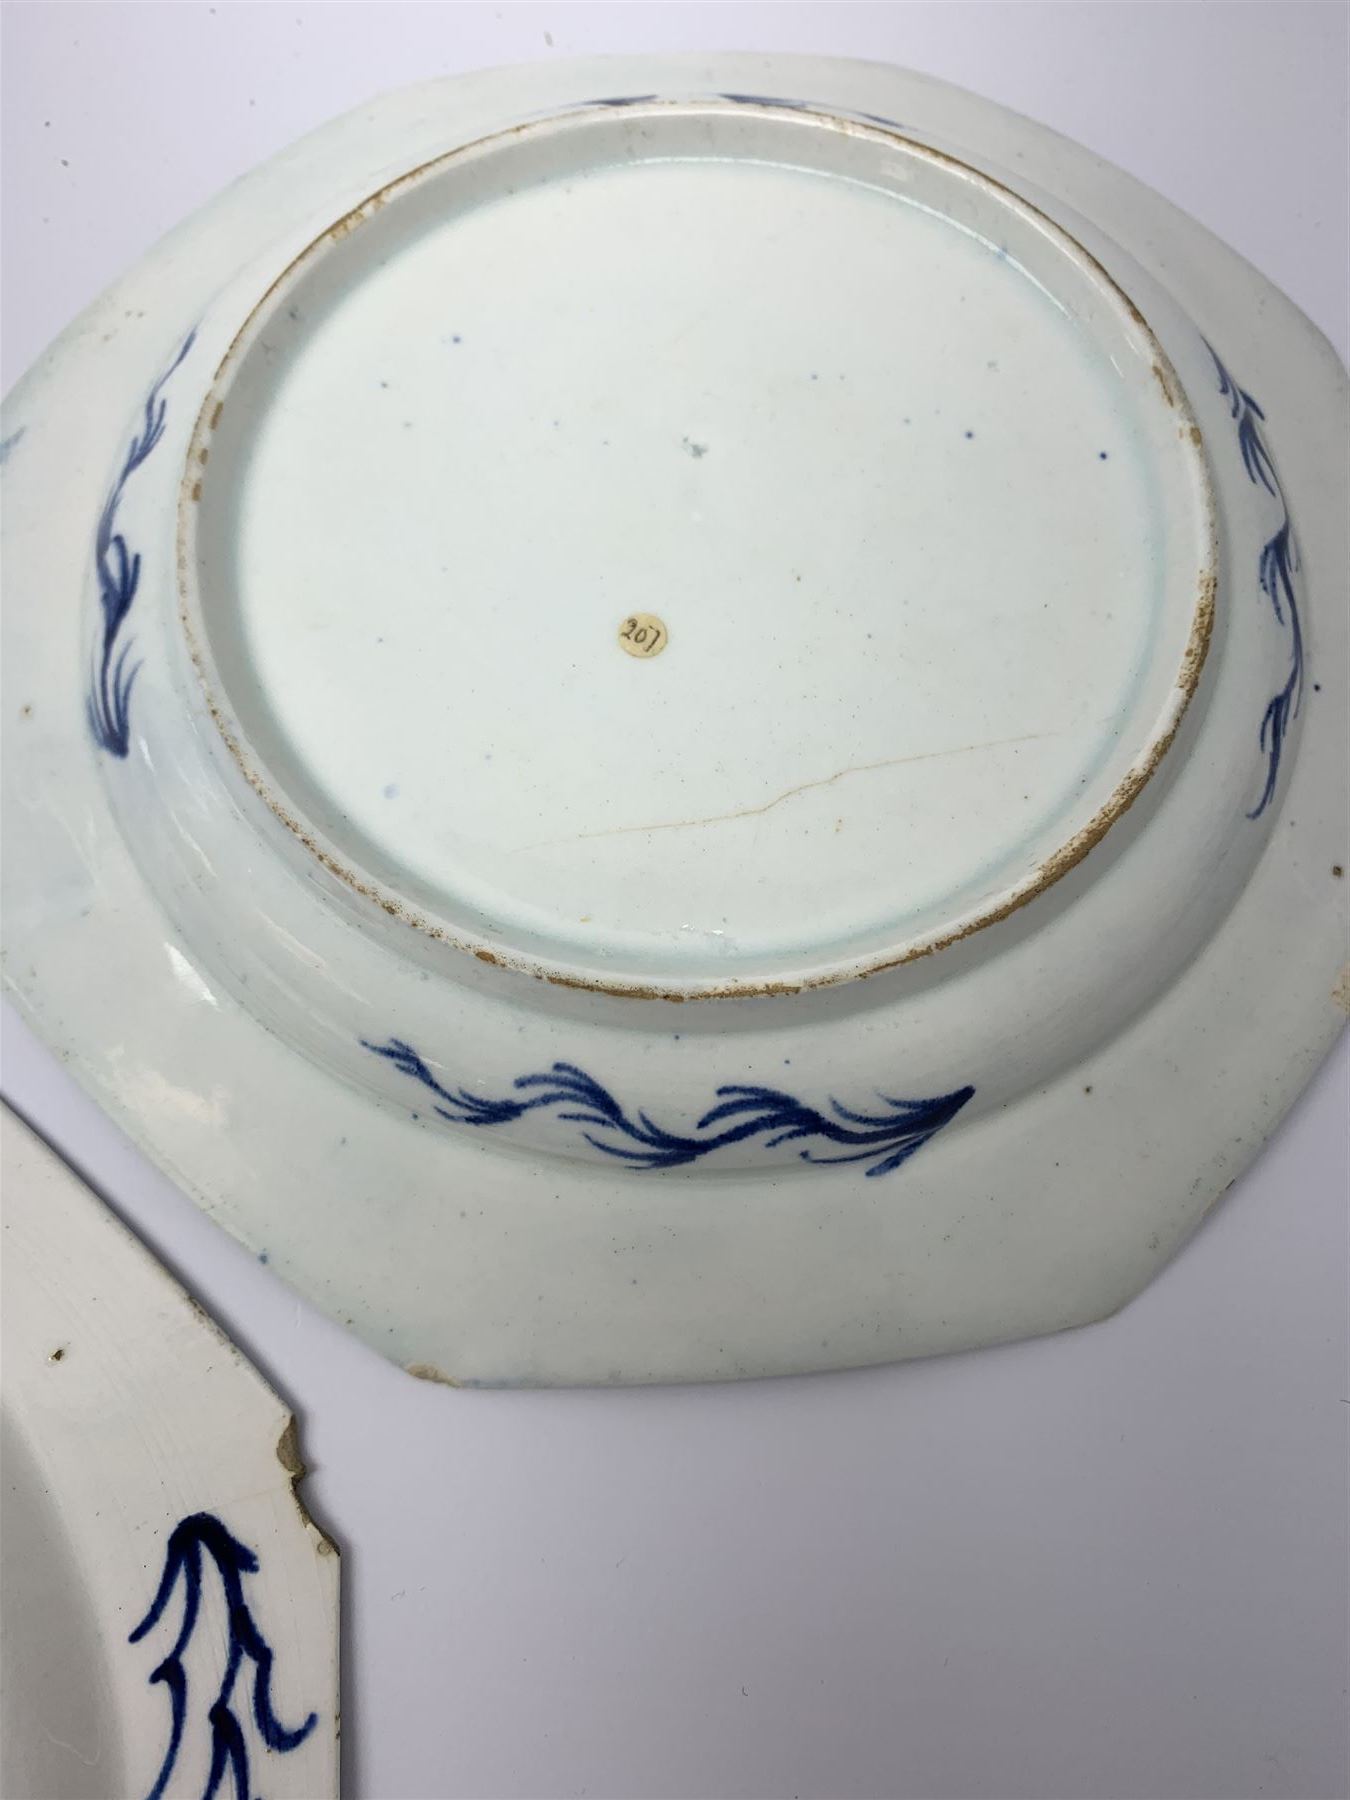 Mid 18th century Bow porcelain plate - Image 6 of 8